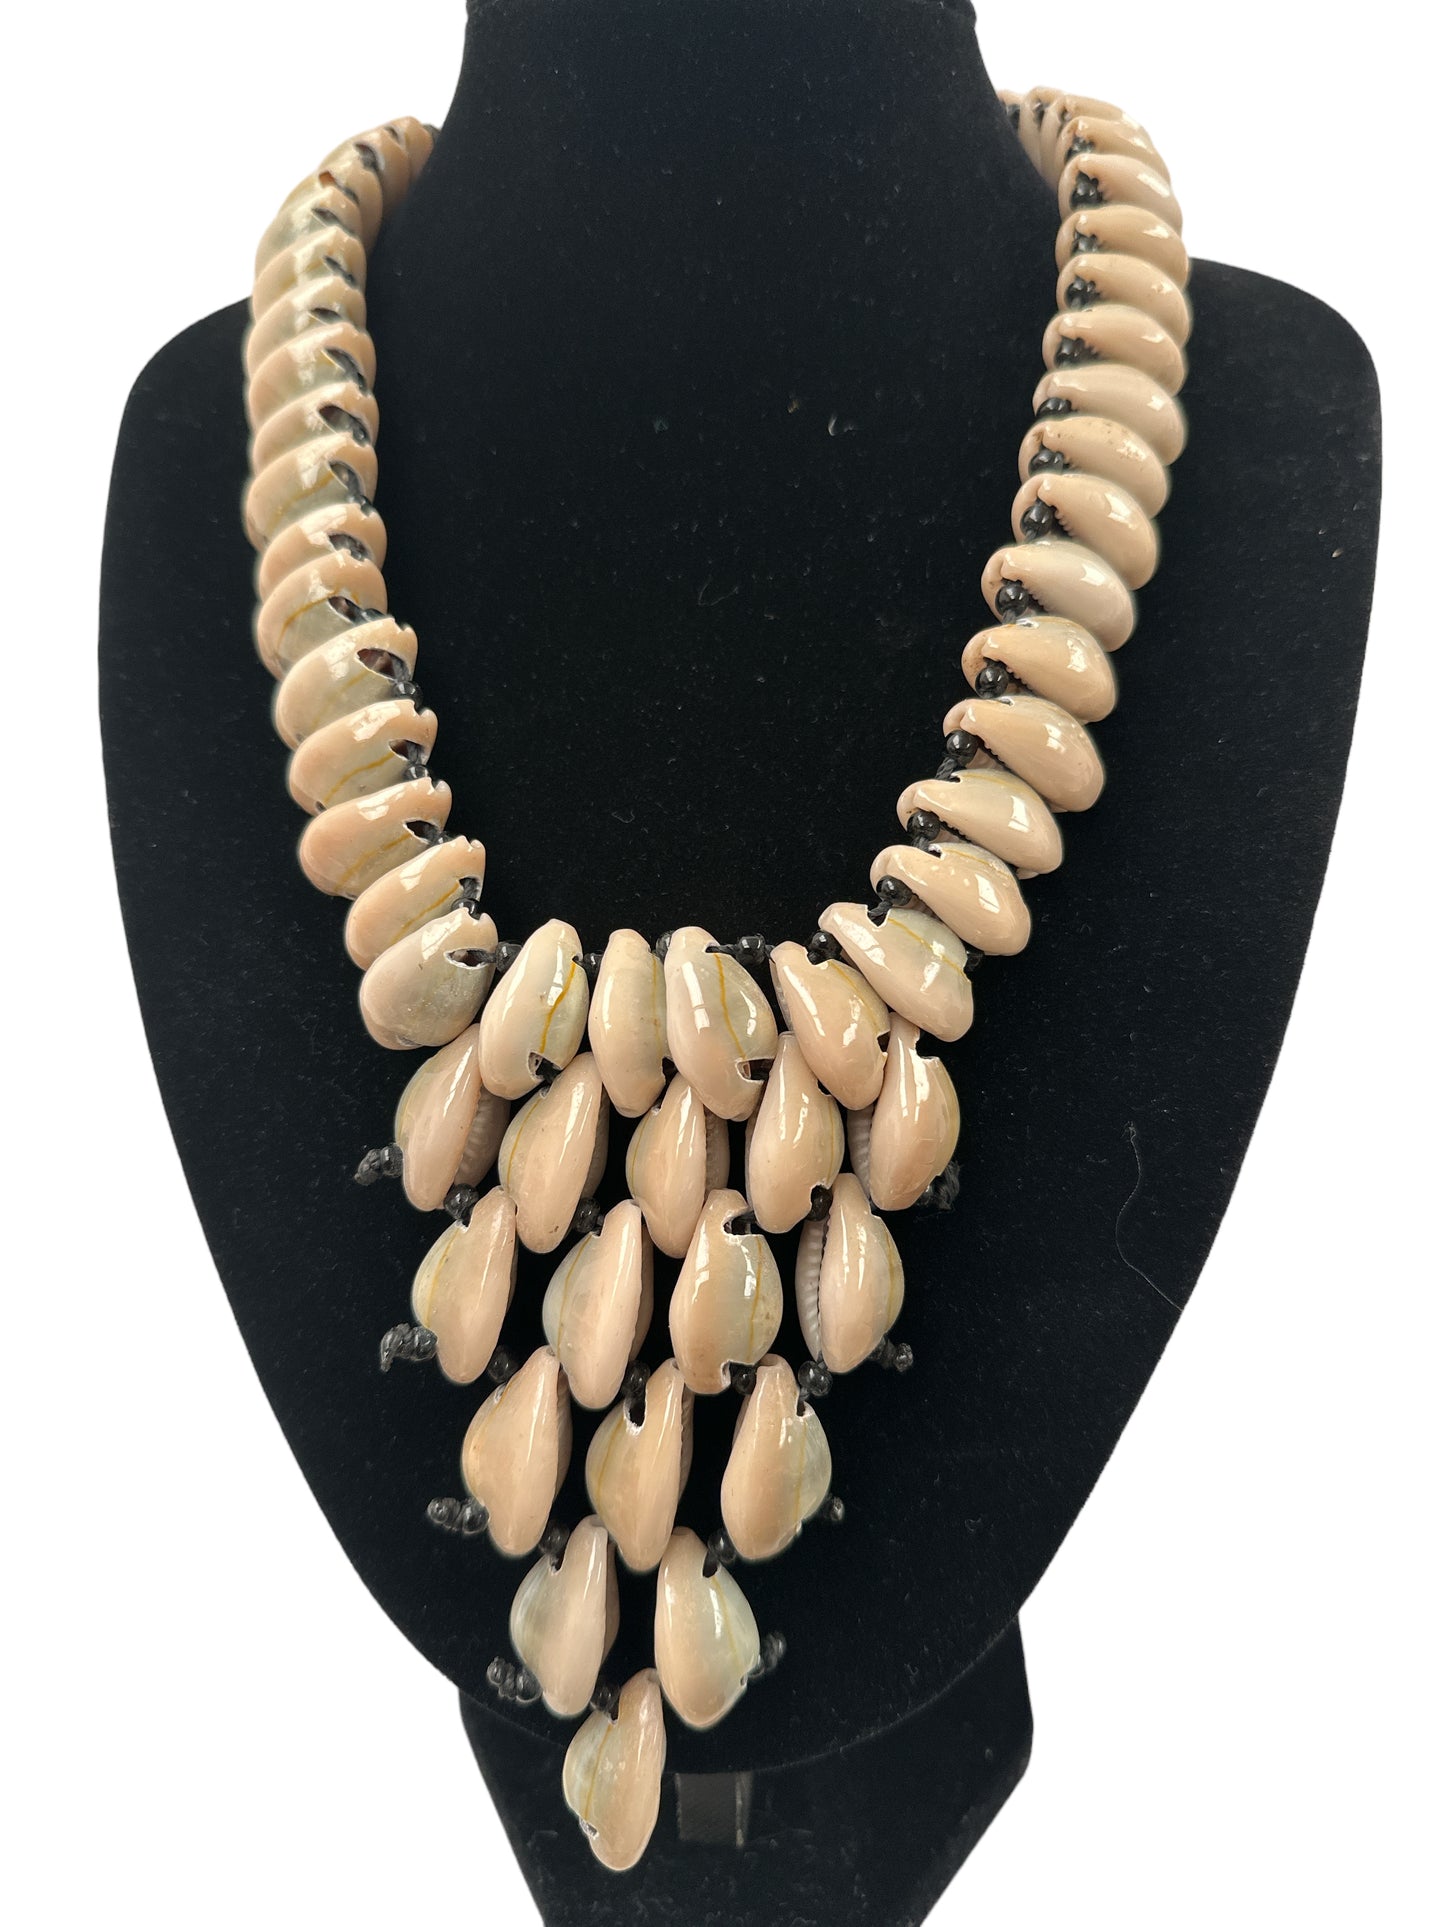 Authentic African Cowrie Seashells Beaded Necklace Pendant